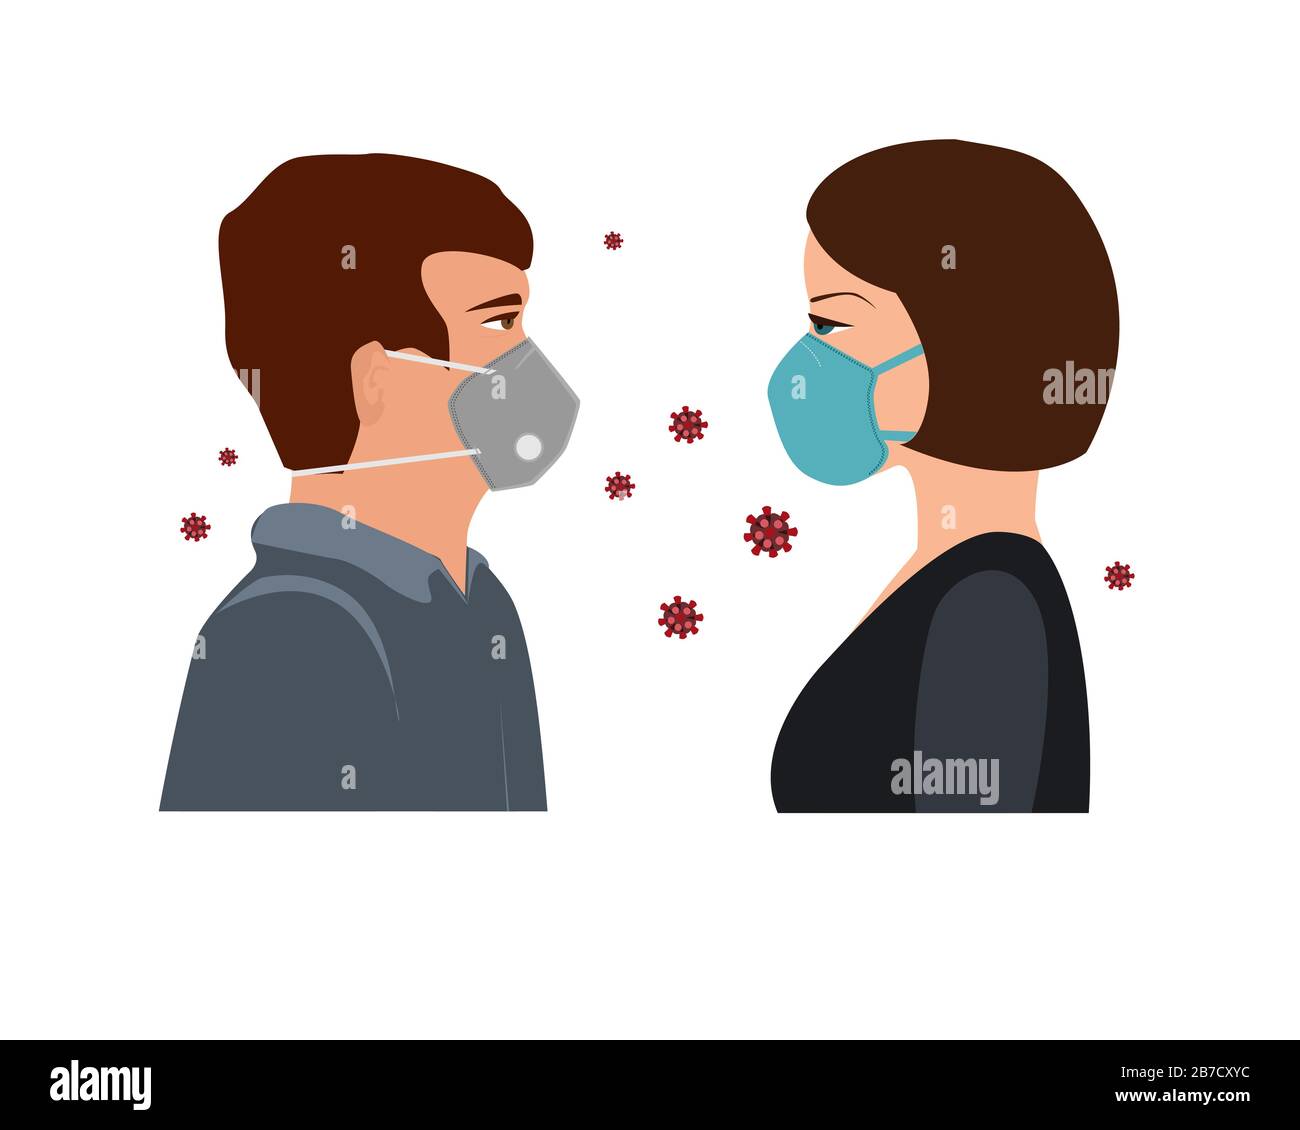 COVID-19, 2019-nCoV concept. Woman and man with medical face masks. Stop coronavirus, vector illustration Stock Vector